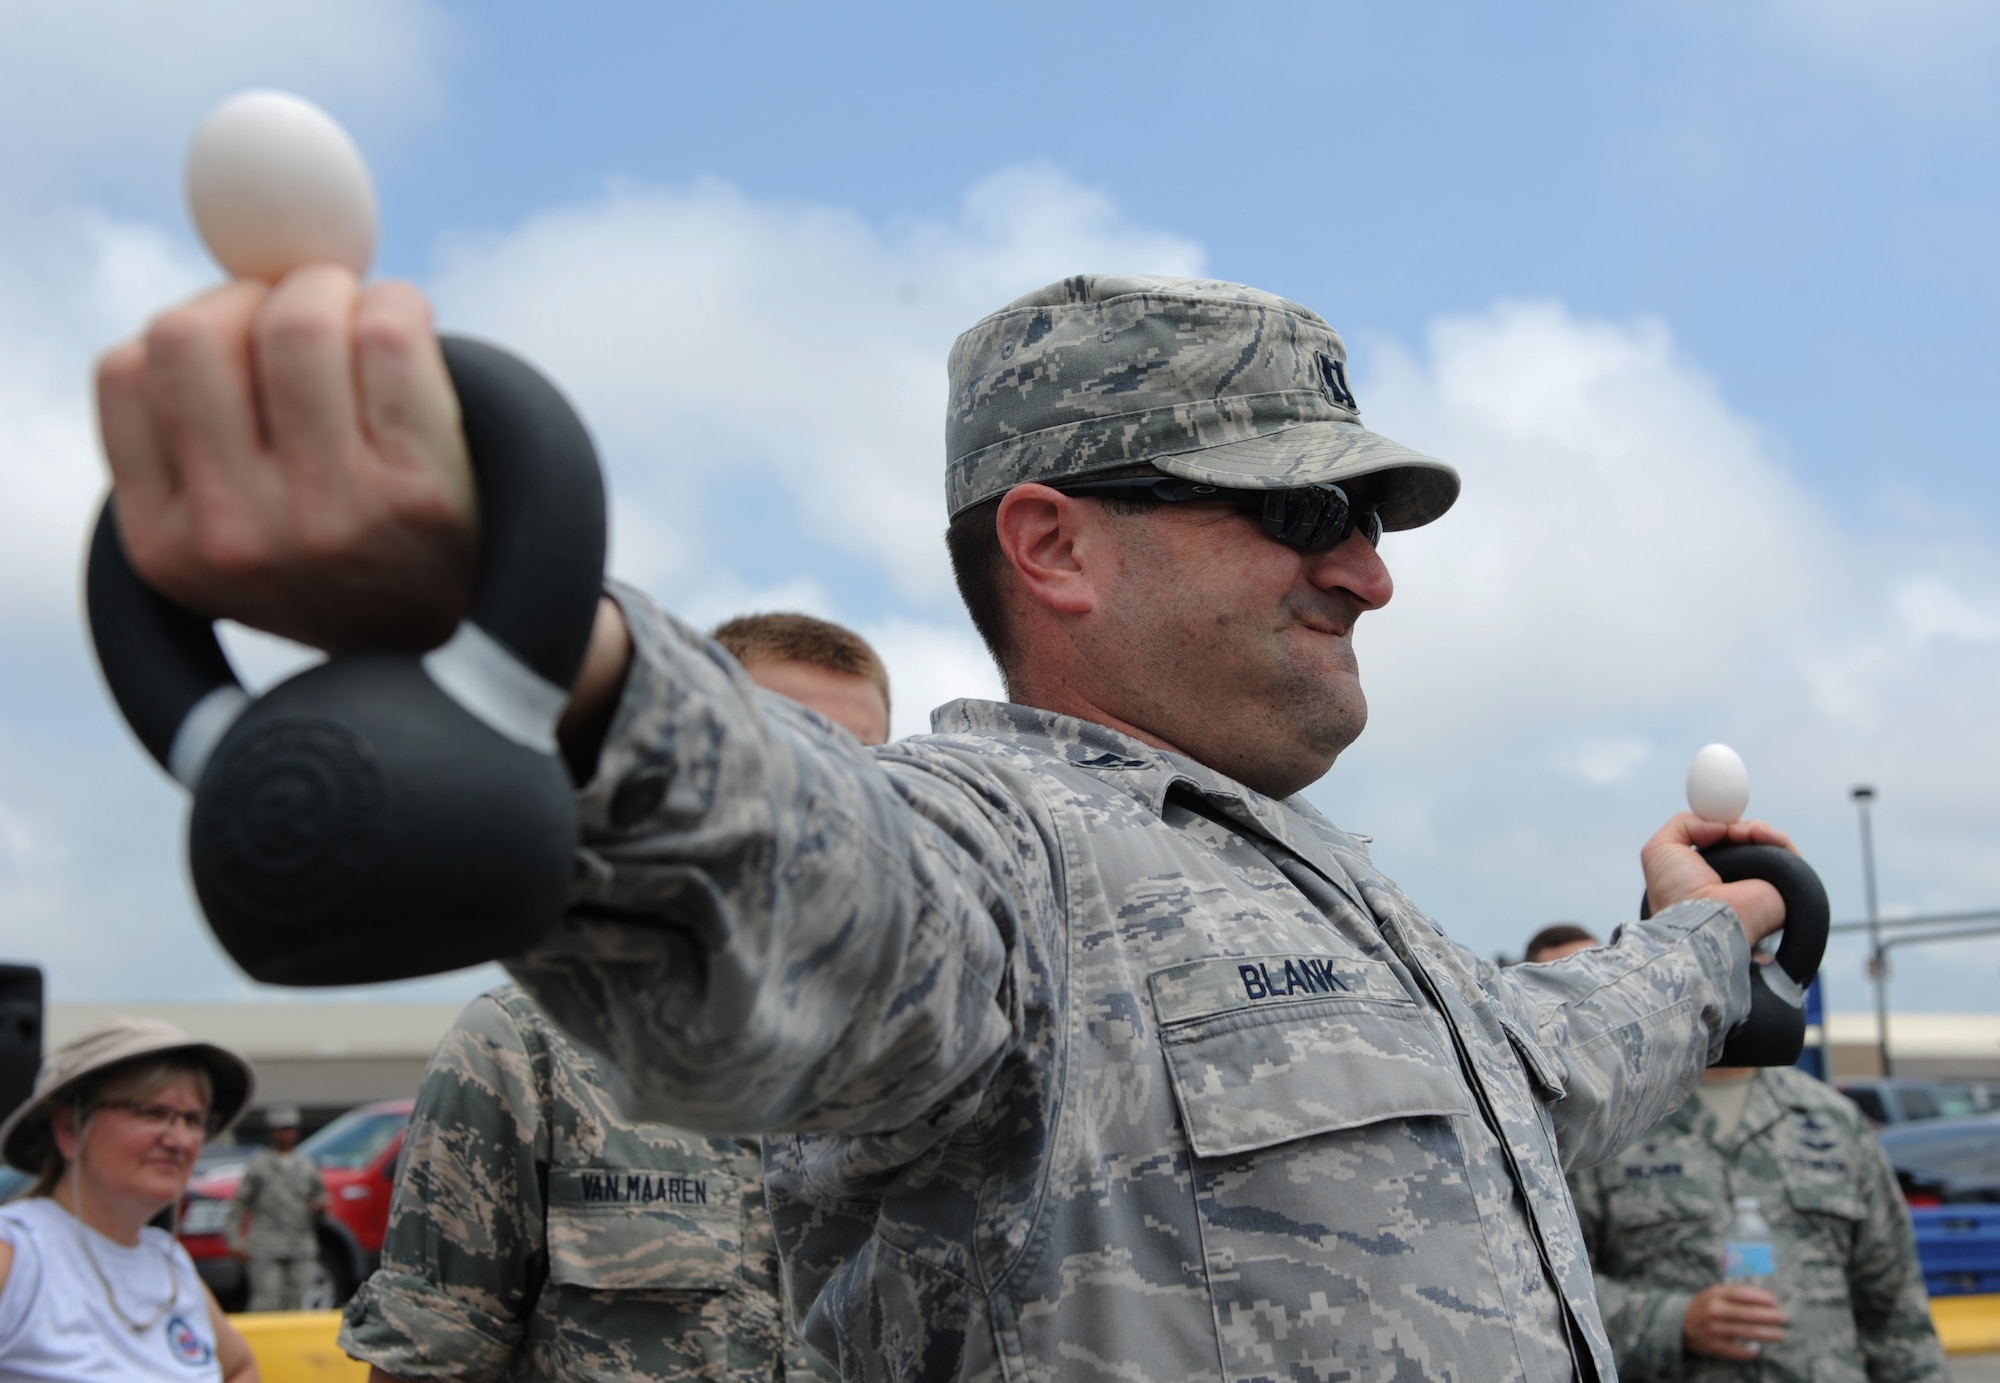 Capt. Gregory Blank, 333rd Training Squadron instructor, competes in a dragon egg hold competition during a burger burn April 29, 2016, Keesler Air Force Base, Miss. The burger burn was the final event of Wingman Week in support of Comprehensive Airman Fitness. (U.S. Air Force photo by Kemberly Groue)